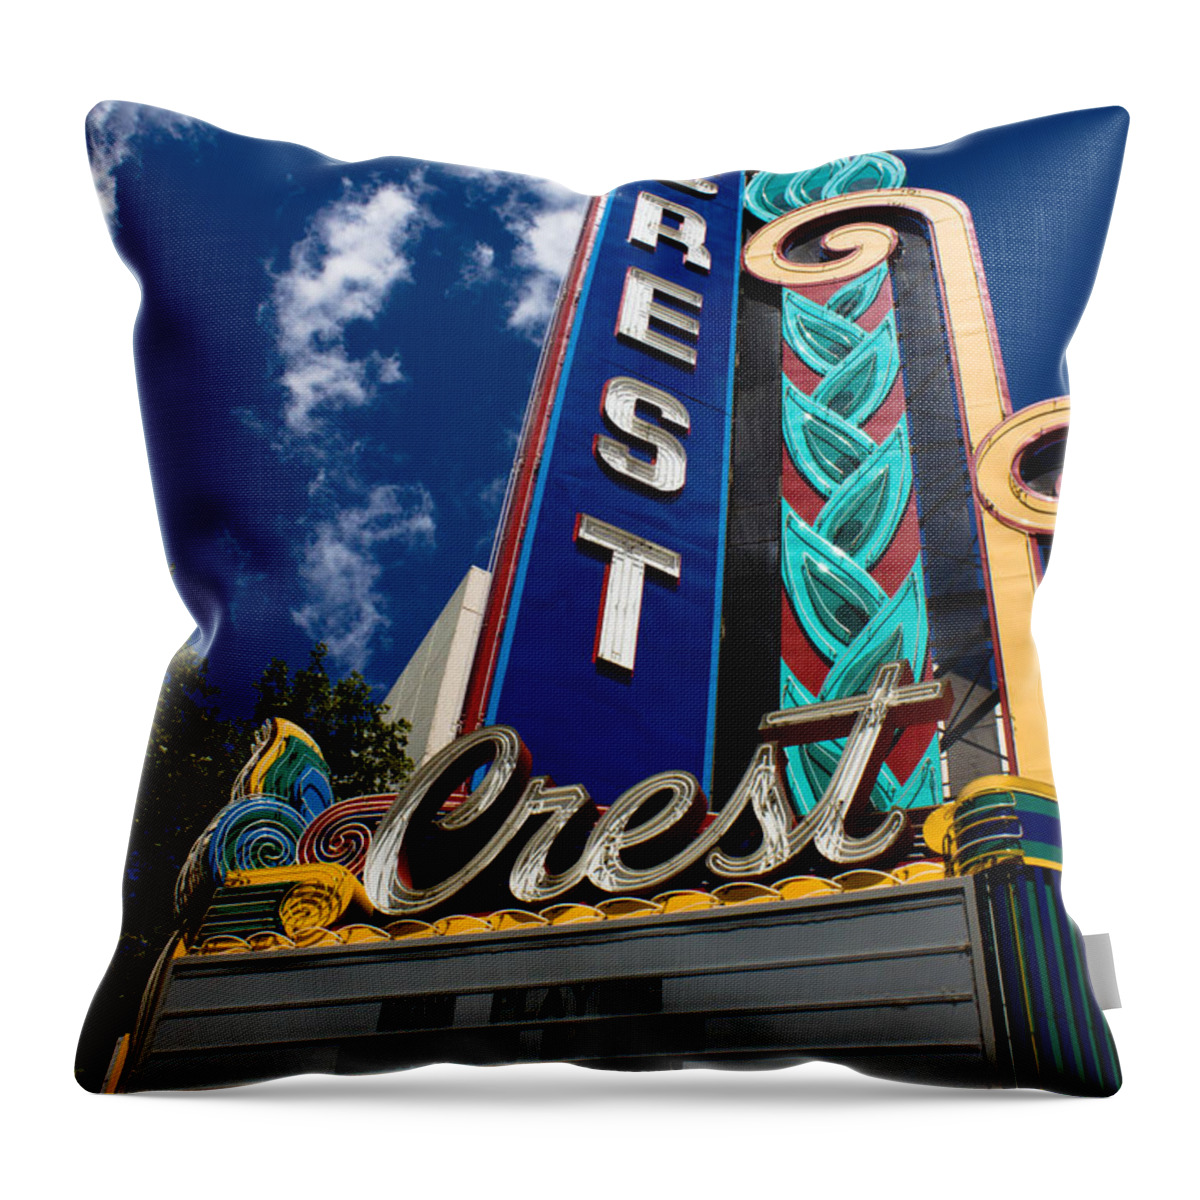 Crest Throw Pillow featuring the photograph Crest Theater by John Daly